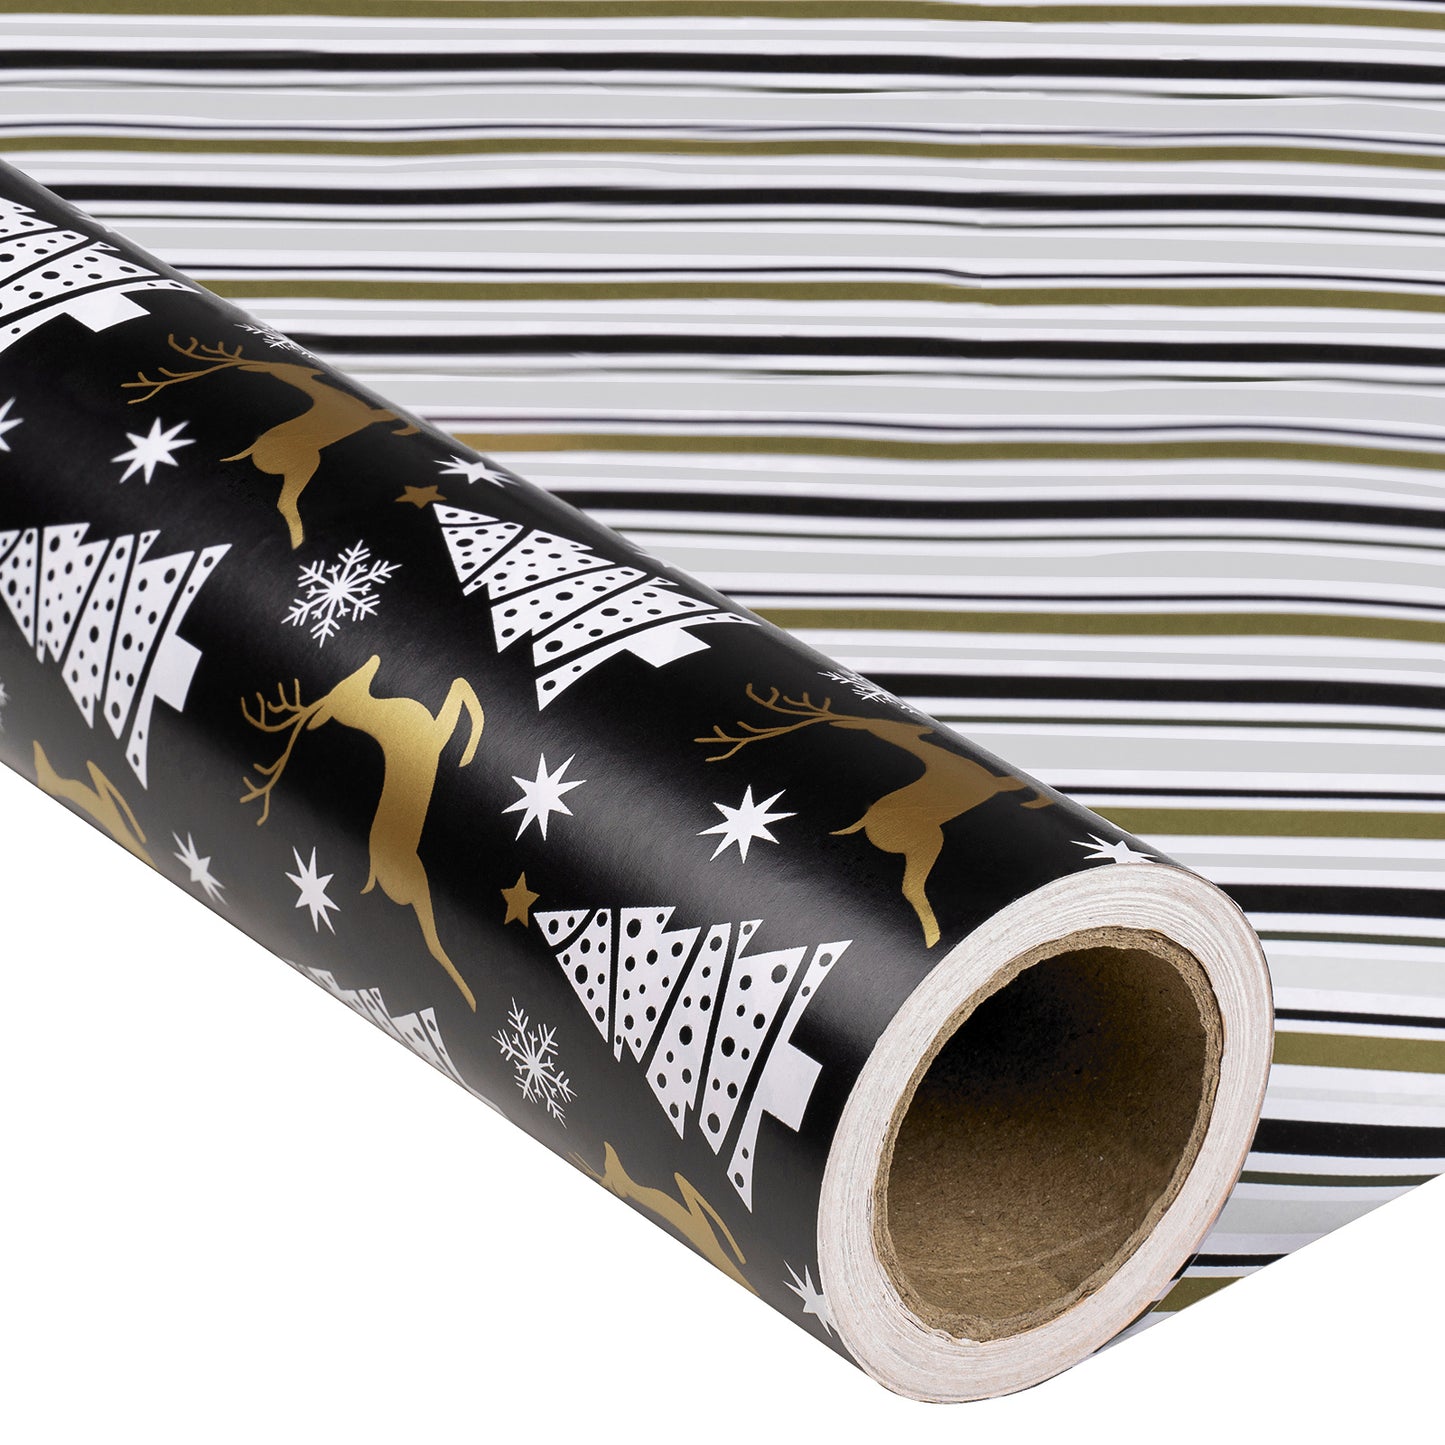 Black Reindeer Wrapping Paper Roll with Brown ＆ Light Blue Diagonal Stripes on Reverse Wholesale Wrapholic